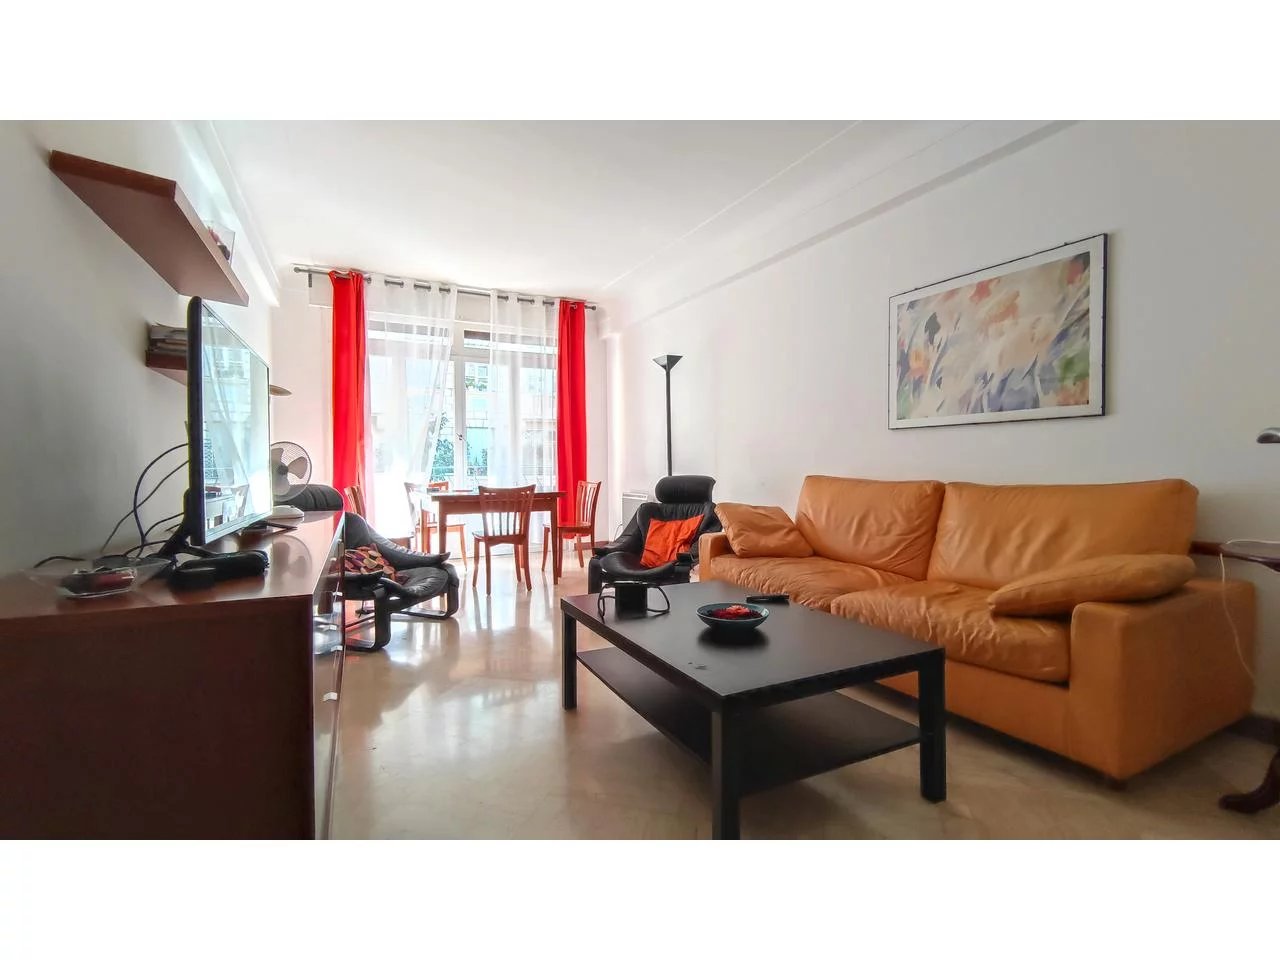 Appartement  3 Rooms 73m2  for sale   516 000 €